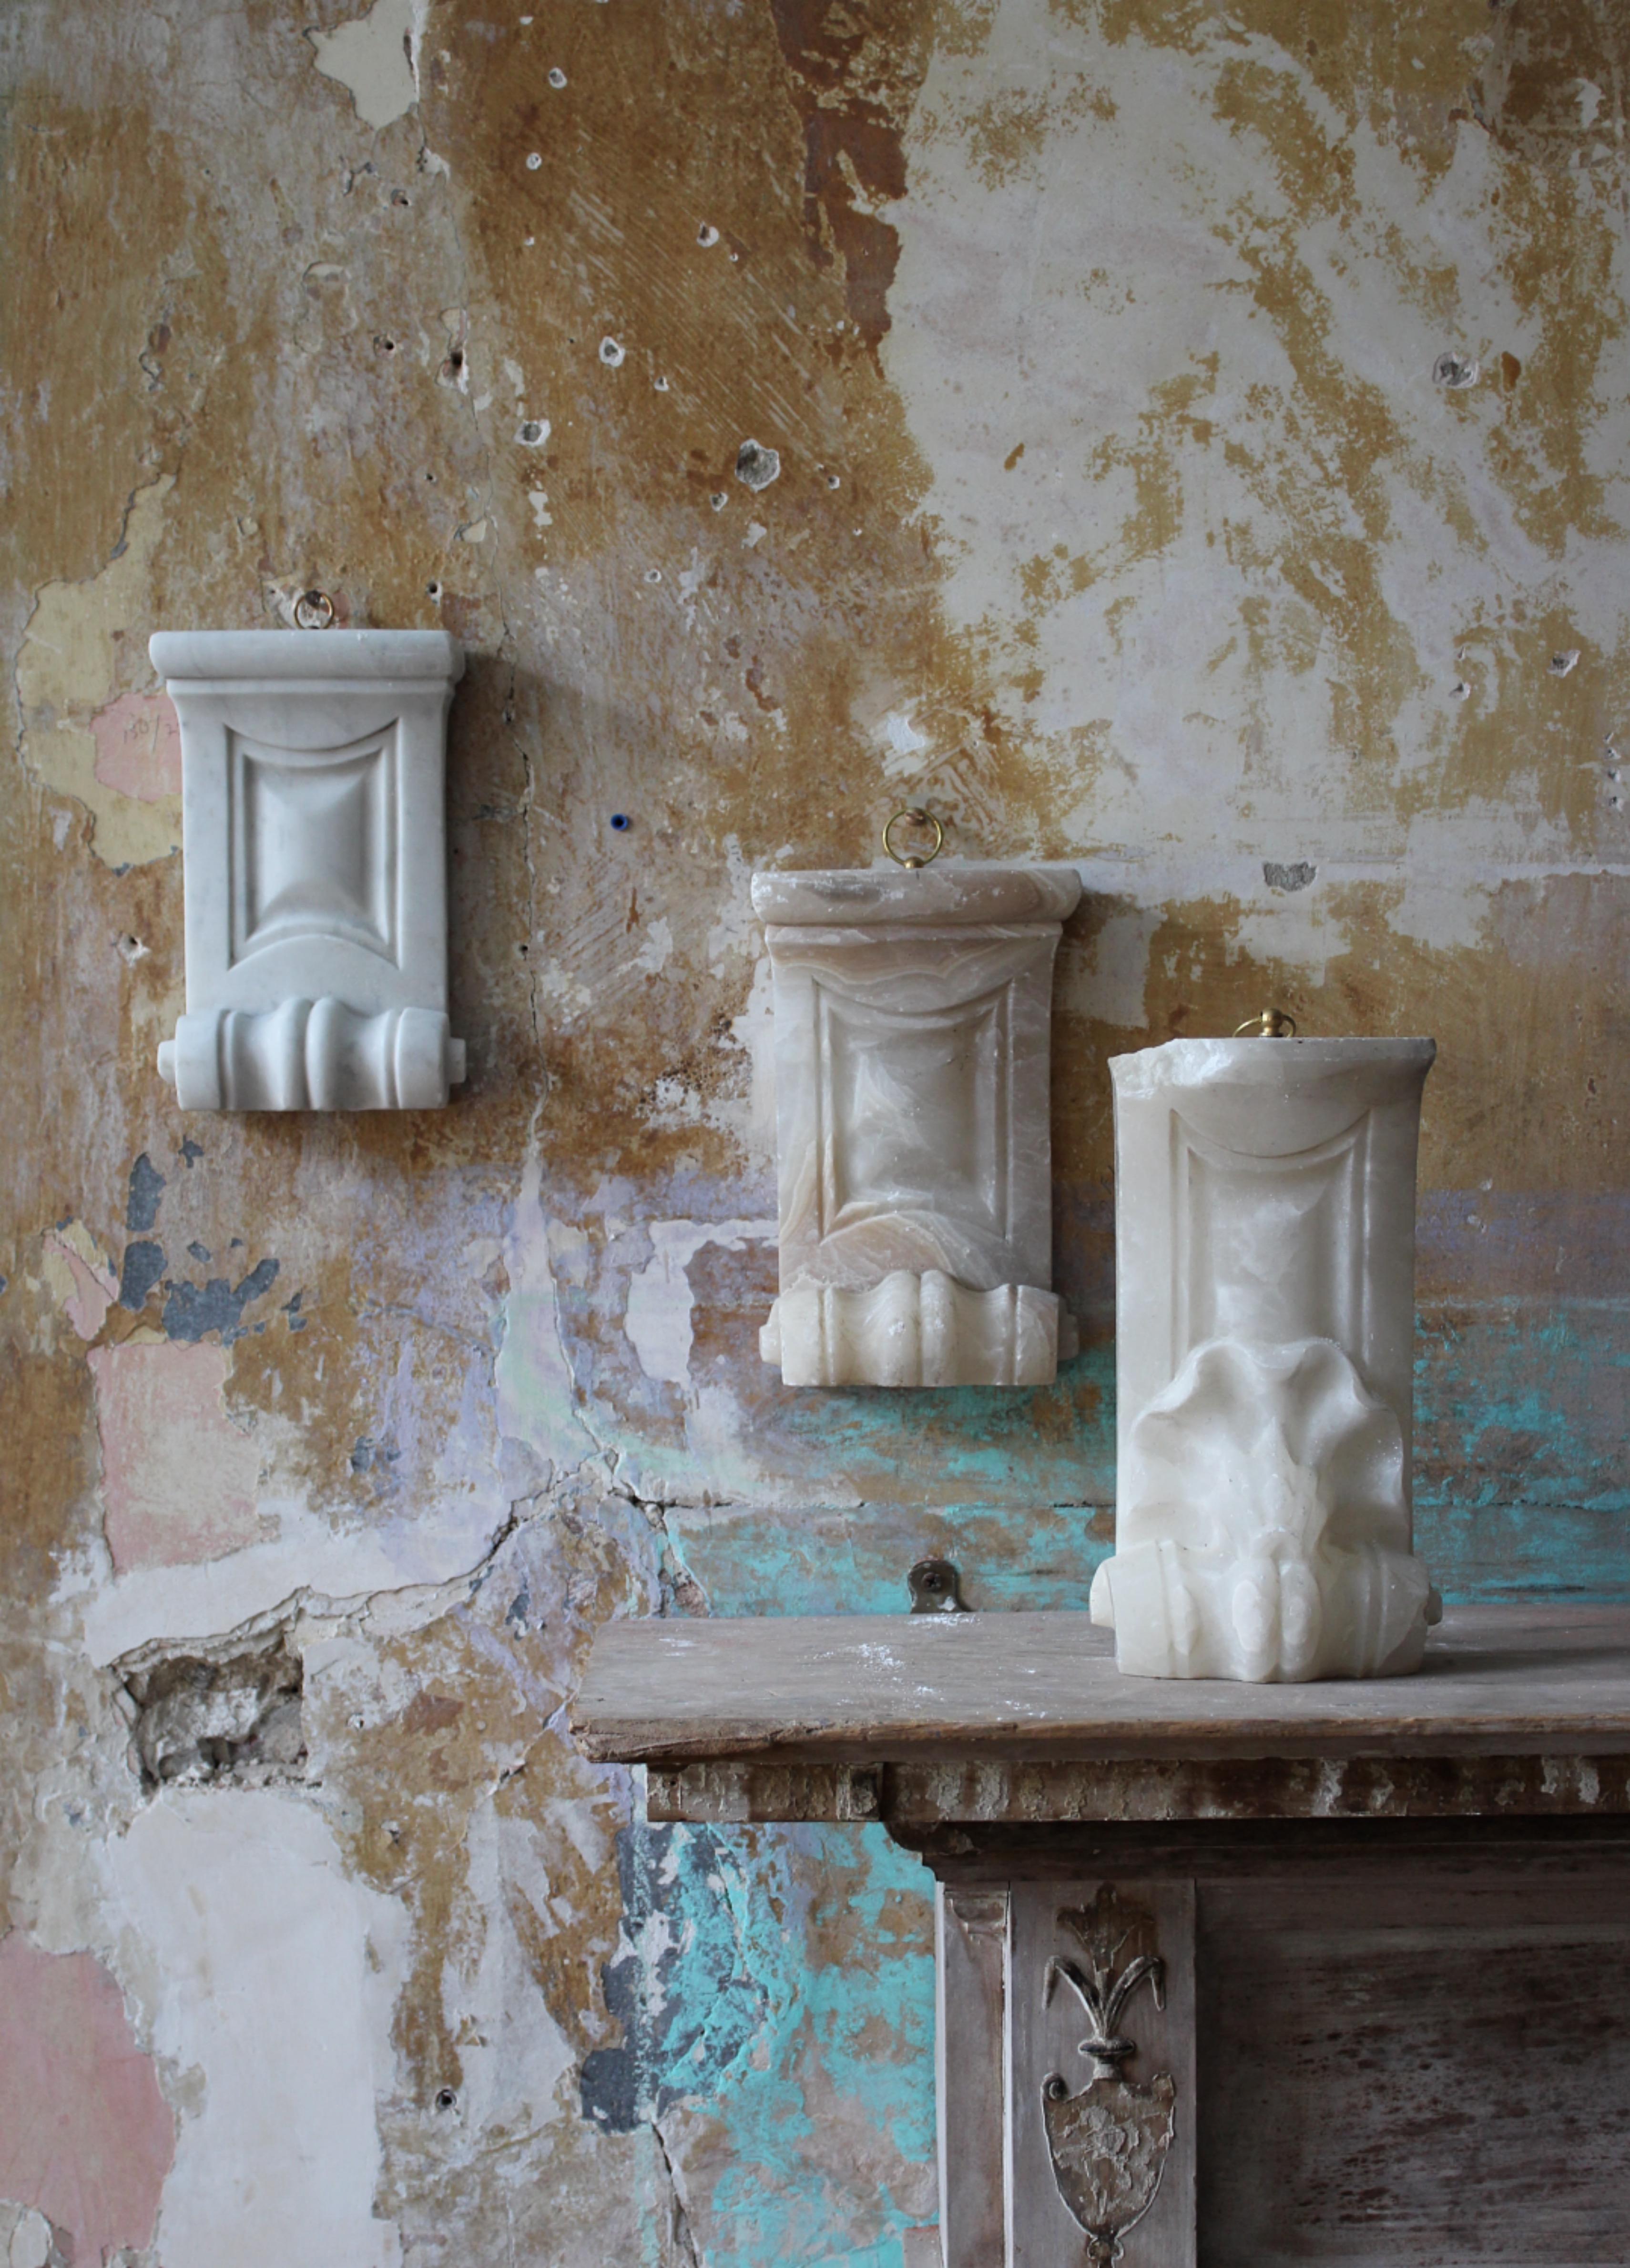 19th century collection of 3 hand carved corbels. two are alabaster and the other marble all with similar organic following decorations and previously part of larger interior architectural feature or fireplace

The sections are extremely well